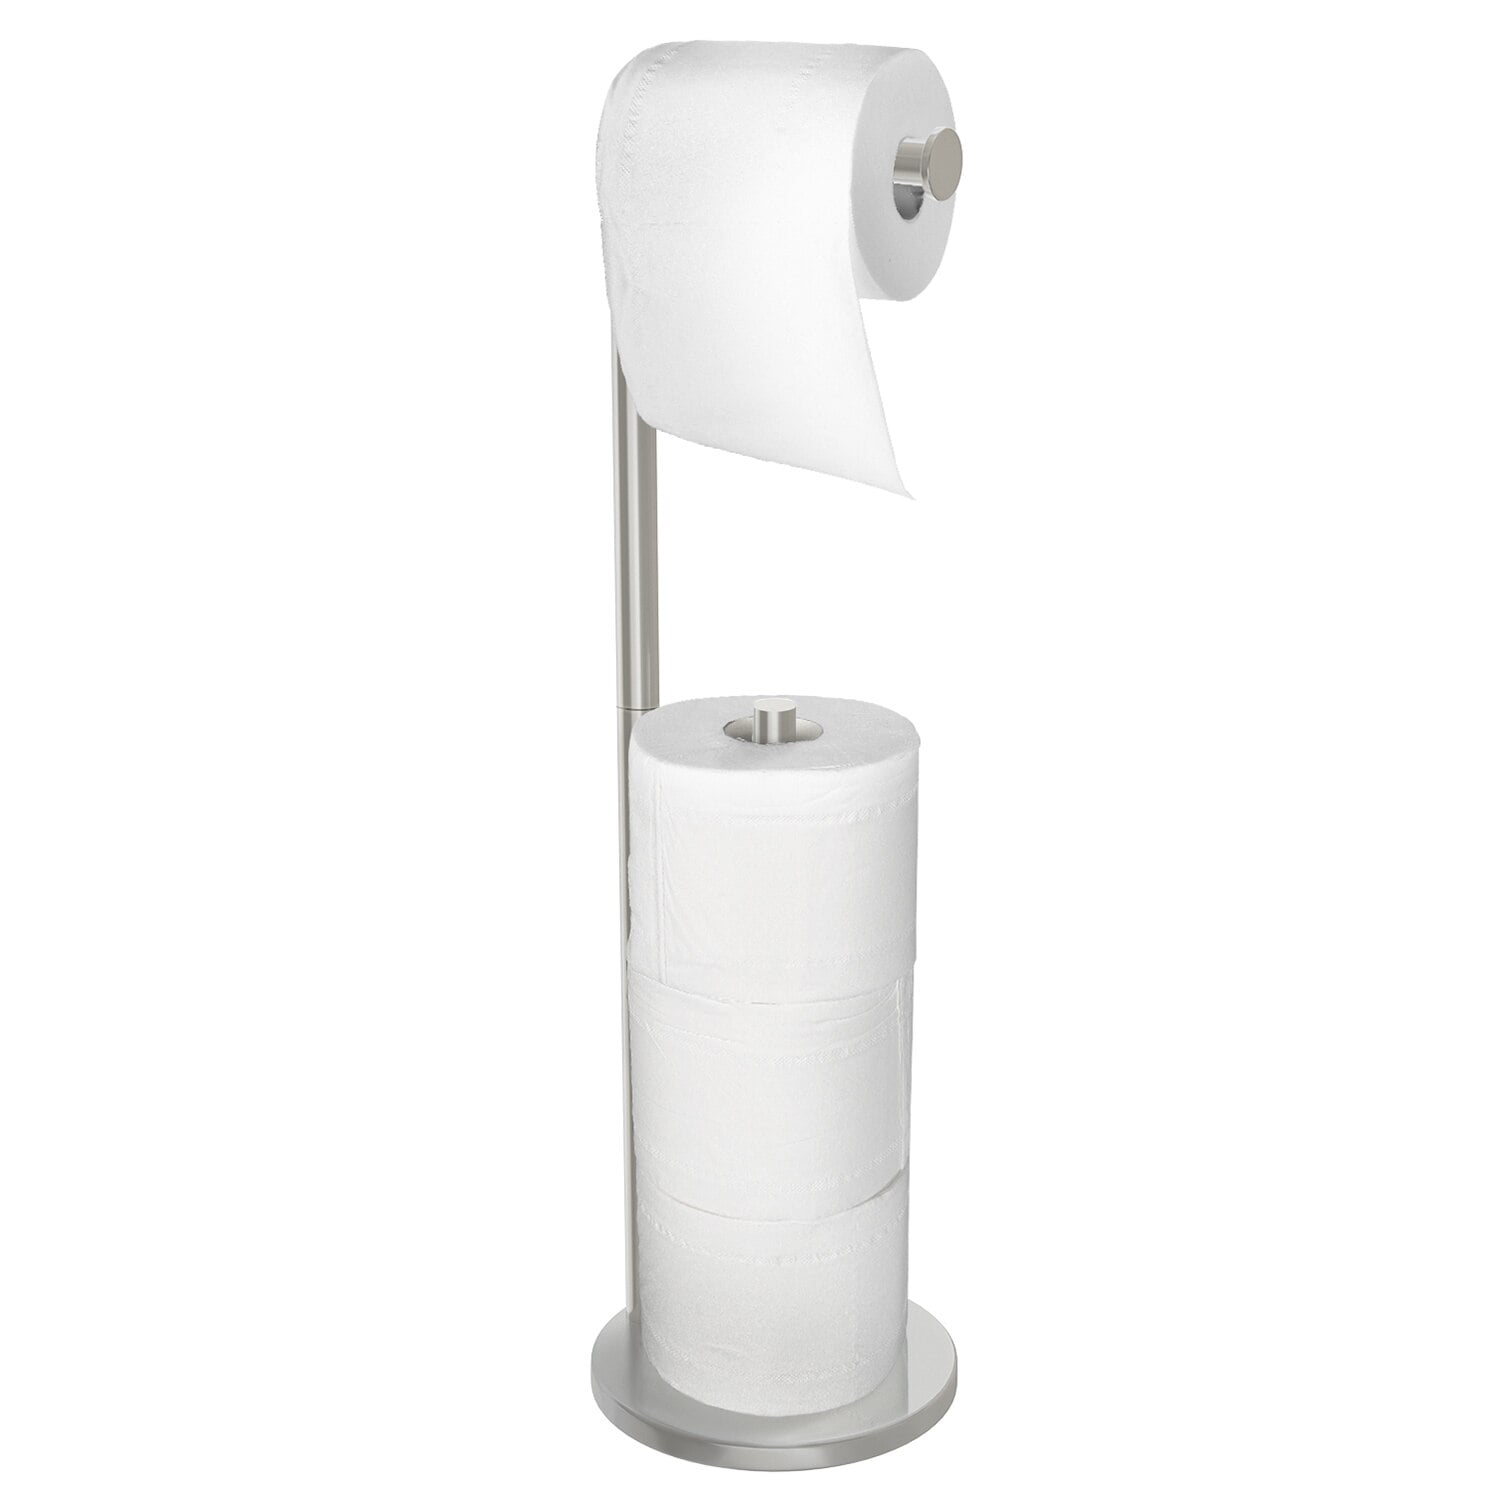 Cabilock Toilet Paper Holder with Shelf Hook Aluminum Wall Mounted Toilet Roll Holder Cell Phone Holder Stand Bathroom 